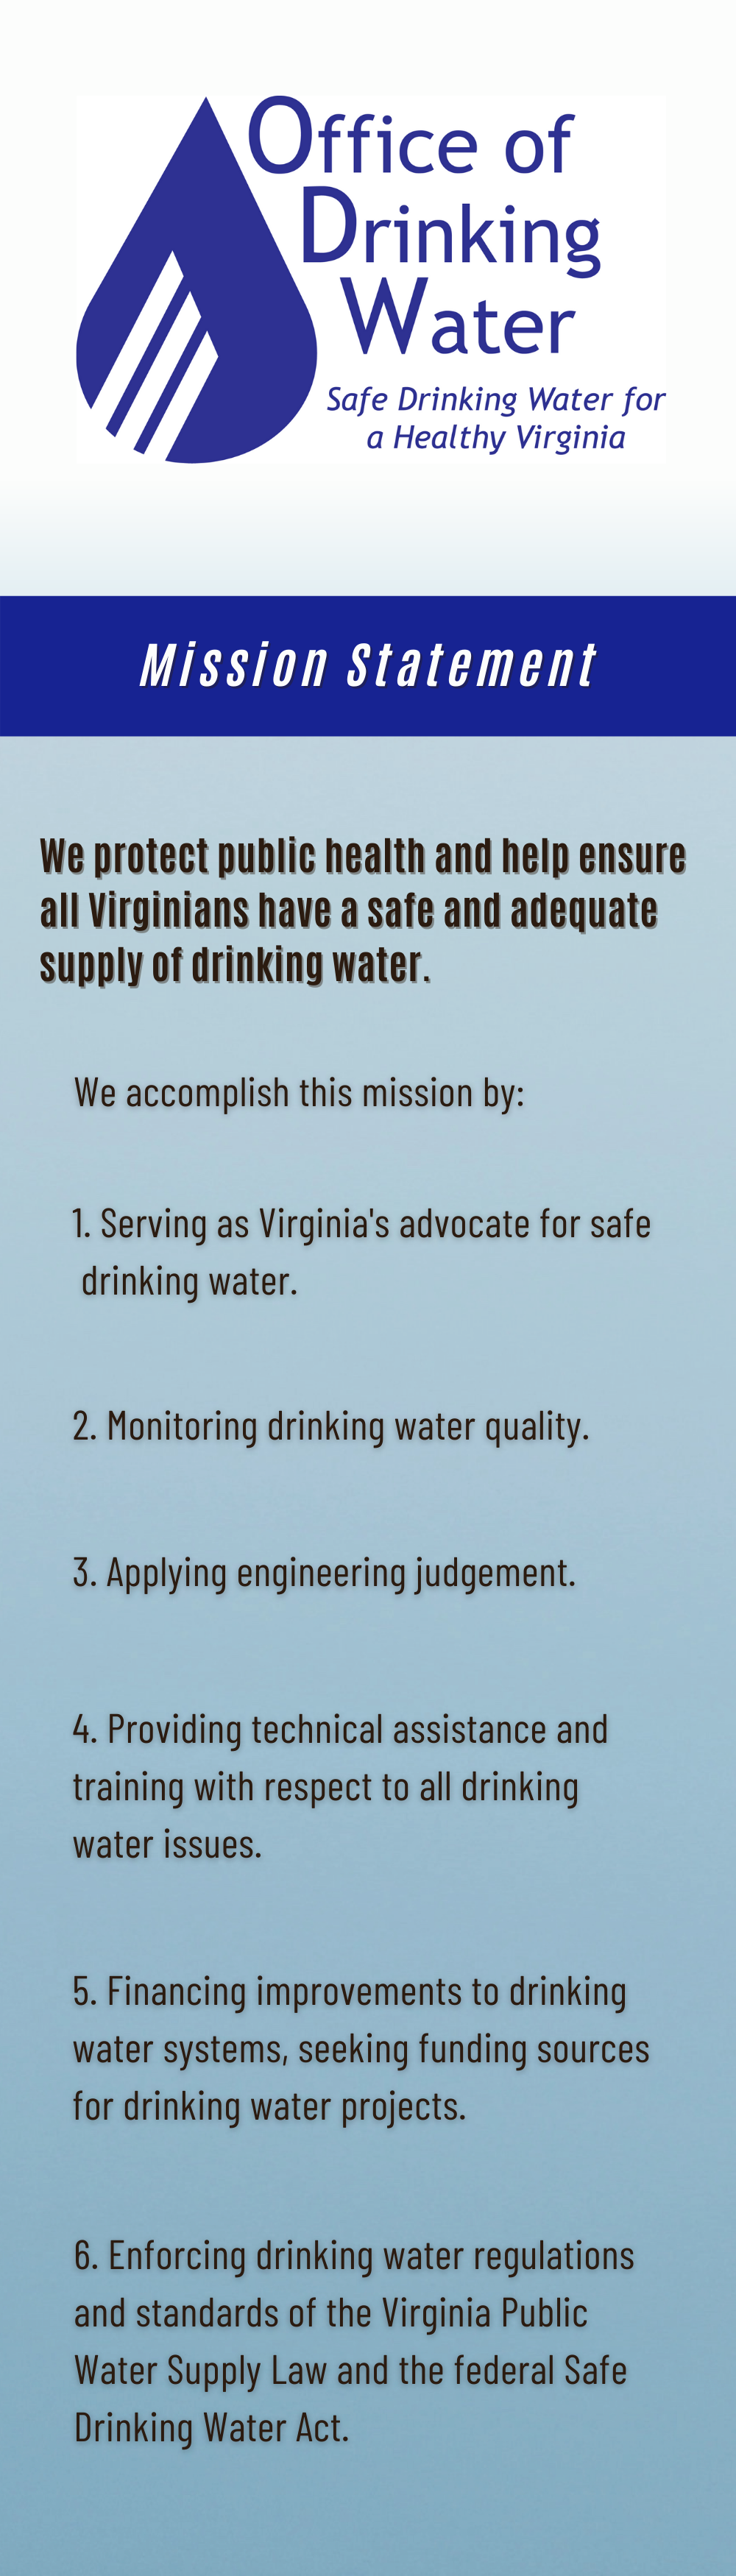 Mission Statement:  We protect Public Health and help ensure all Virginians have a safe and adequate supply of drinking water.  We accomplish this by:  1) Serving as Virginia's advocate for safe drinking water.  2) Monitoring drinking water quality  3) Applying engineering judgement  4) Providing technical assistance and training with respect to all drinking water issues.  5) Financing improvements to drinking water systems. 6) Enforcing drinking water rgulations and standards of the VA Public Water Supply Law and Federal Safe Drinking Water Act